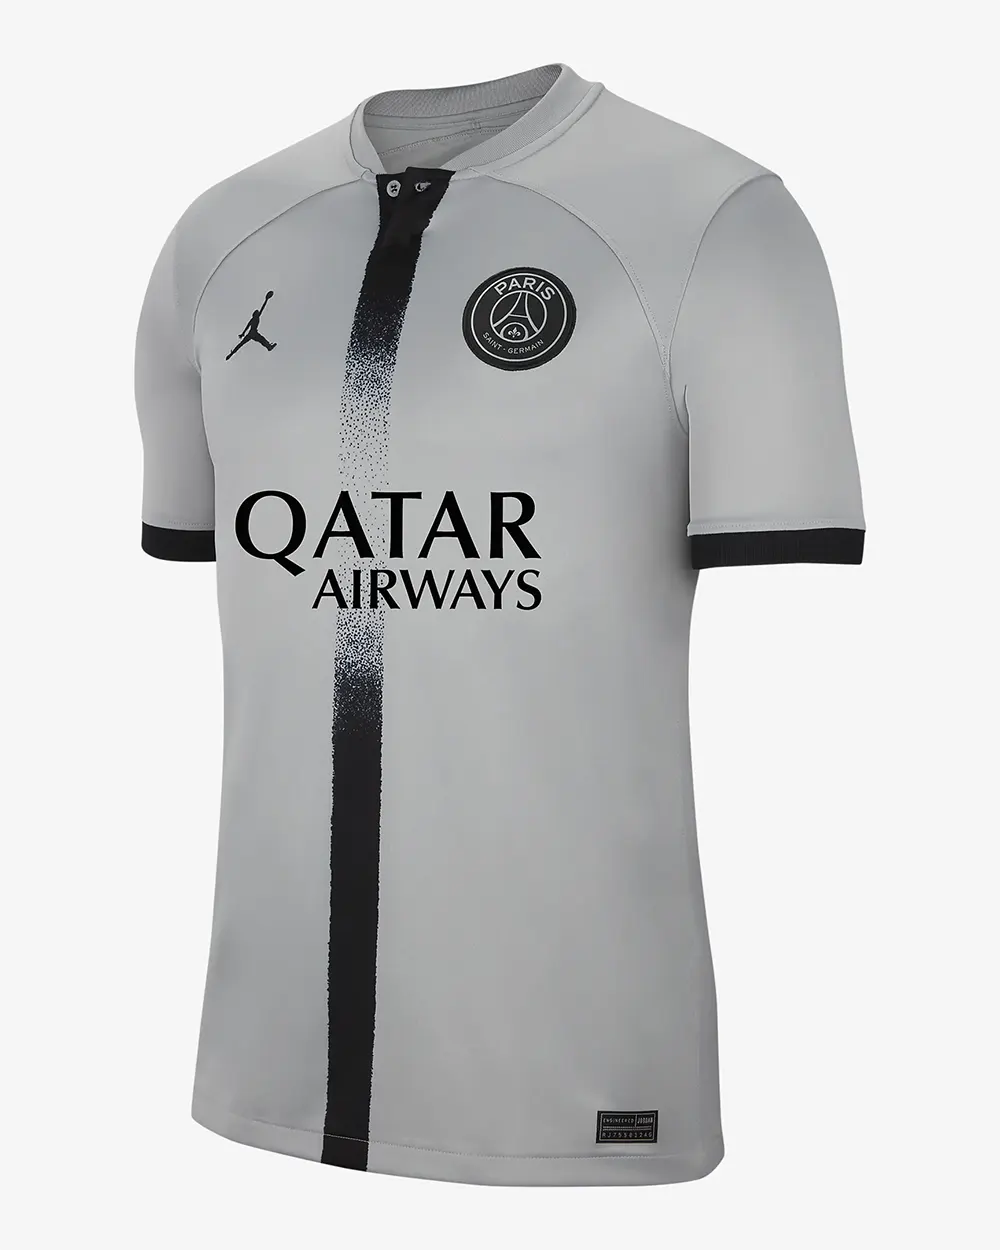 Pano Football Shirt - @psg Paris Saint-Germain x Louis Vuitton It's one of  the best PSG shirts, their away kit from 2006, inspired by @louisvuitton  Available In Site